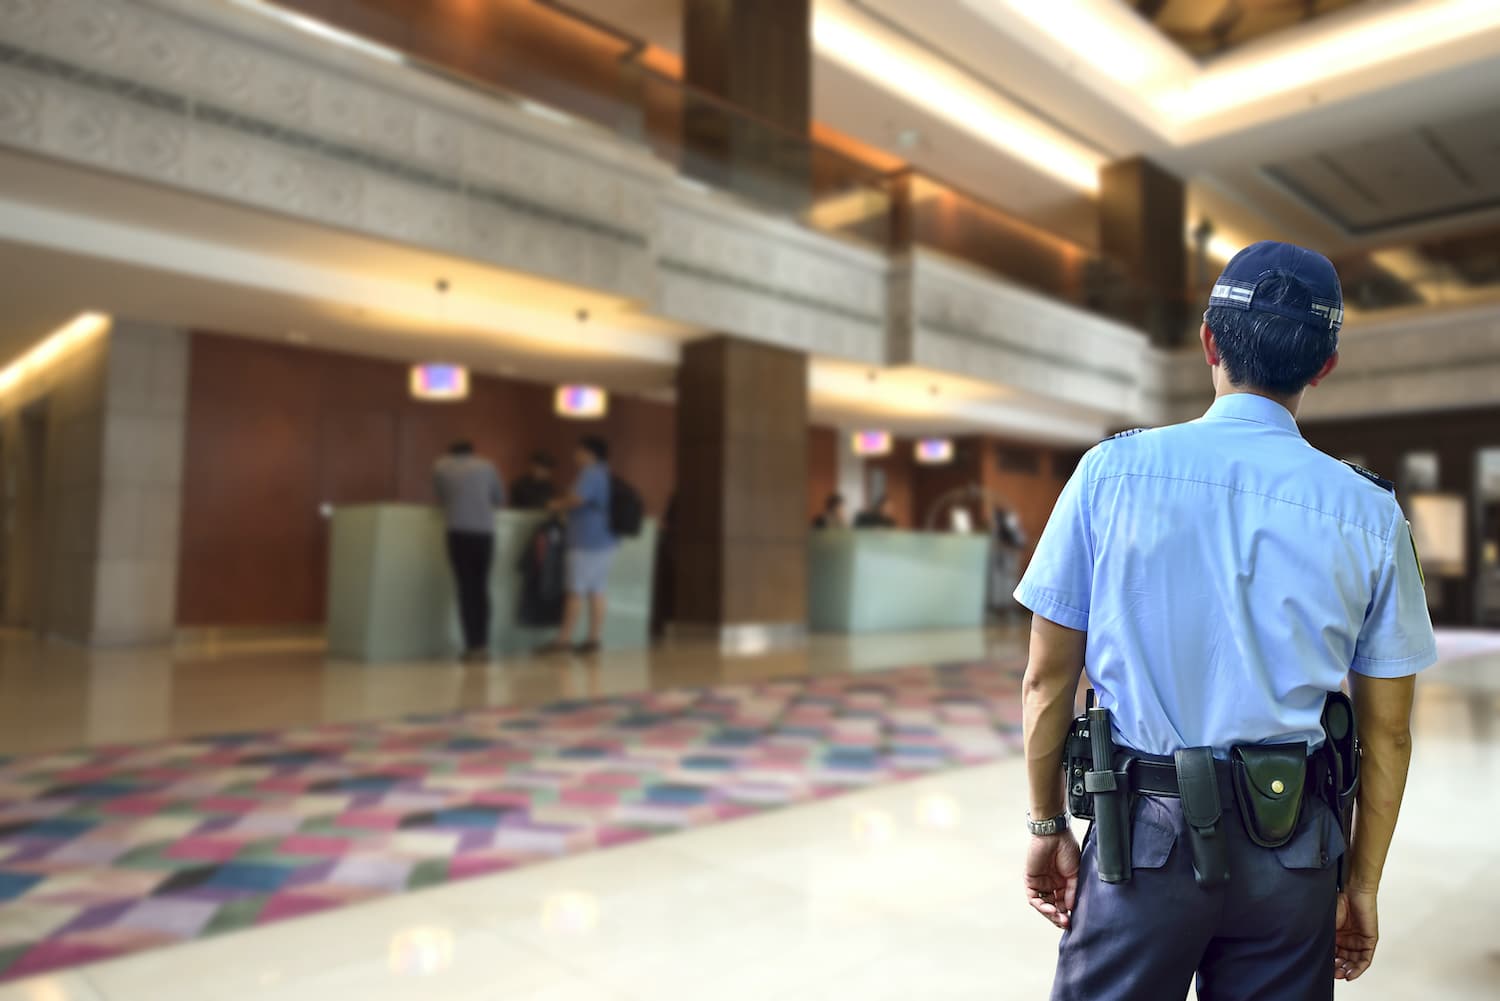 Holding a Big Event? Use These Tips to Keep Maximize Guest Security